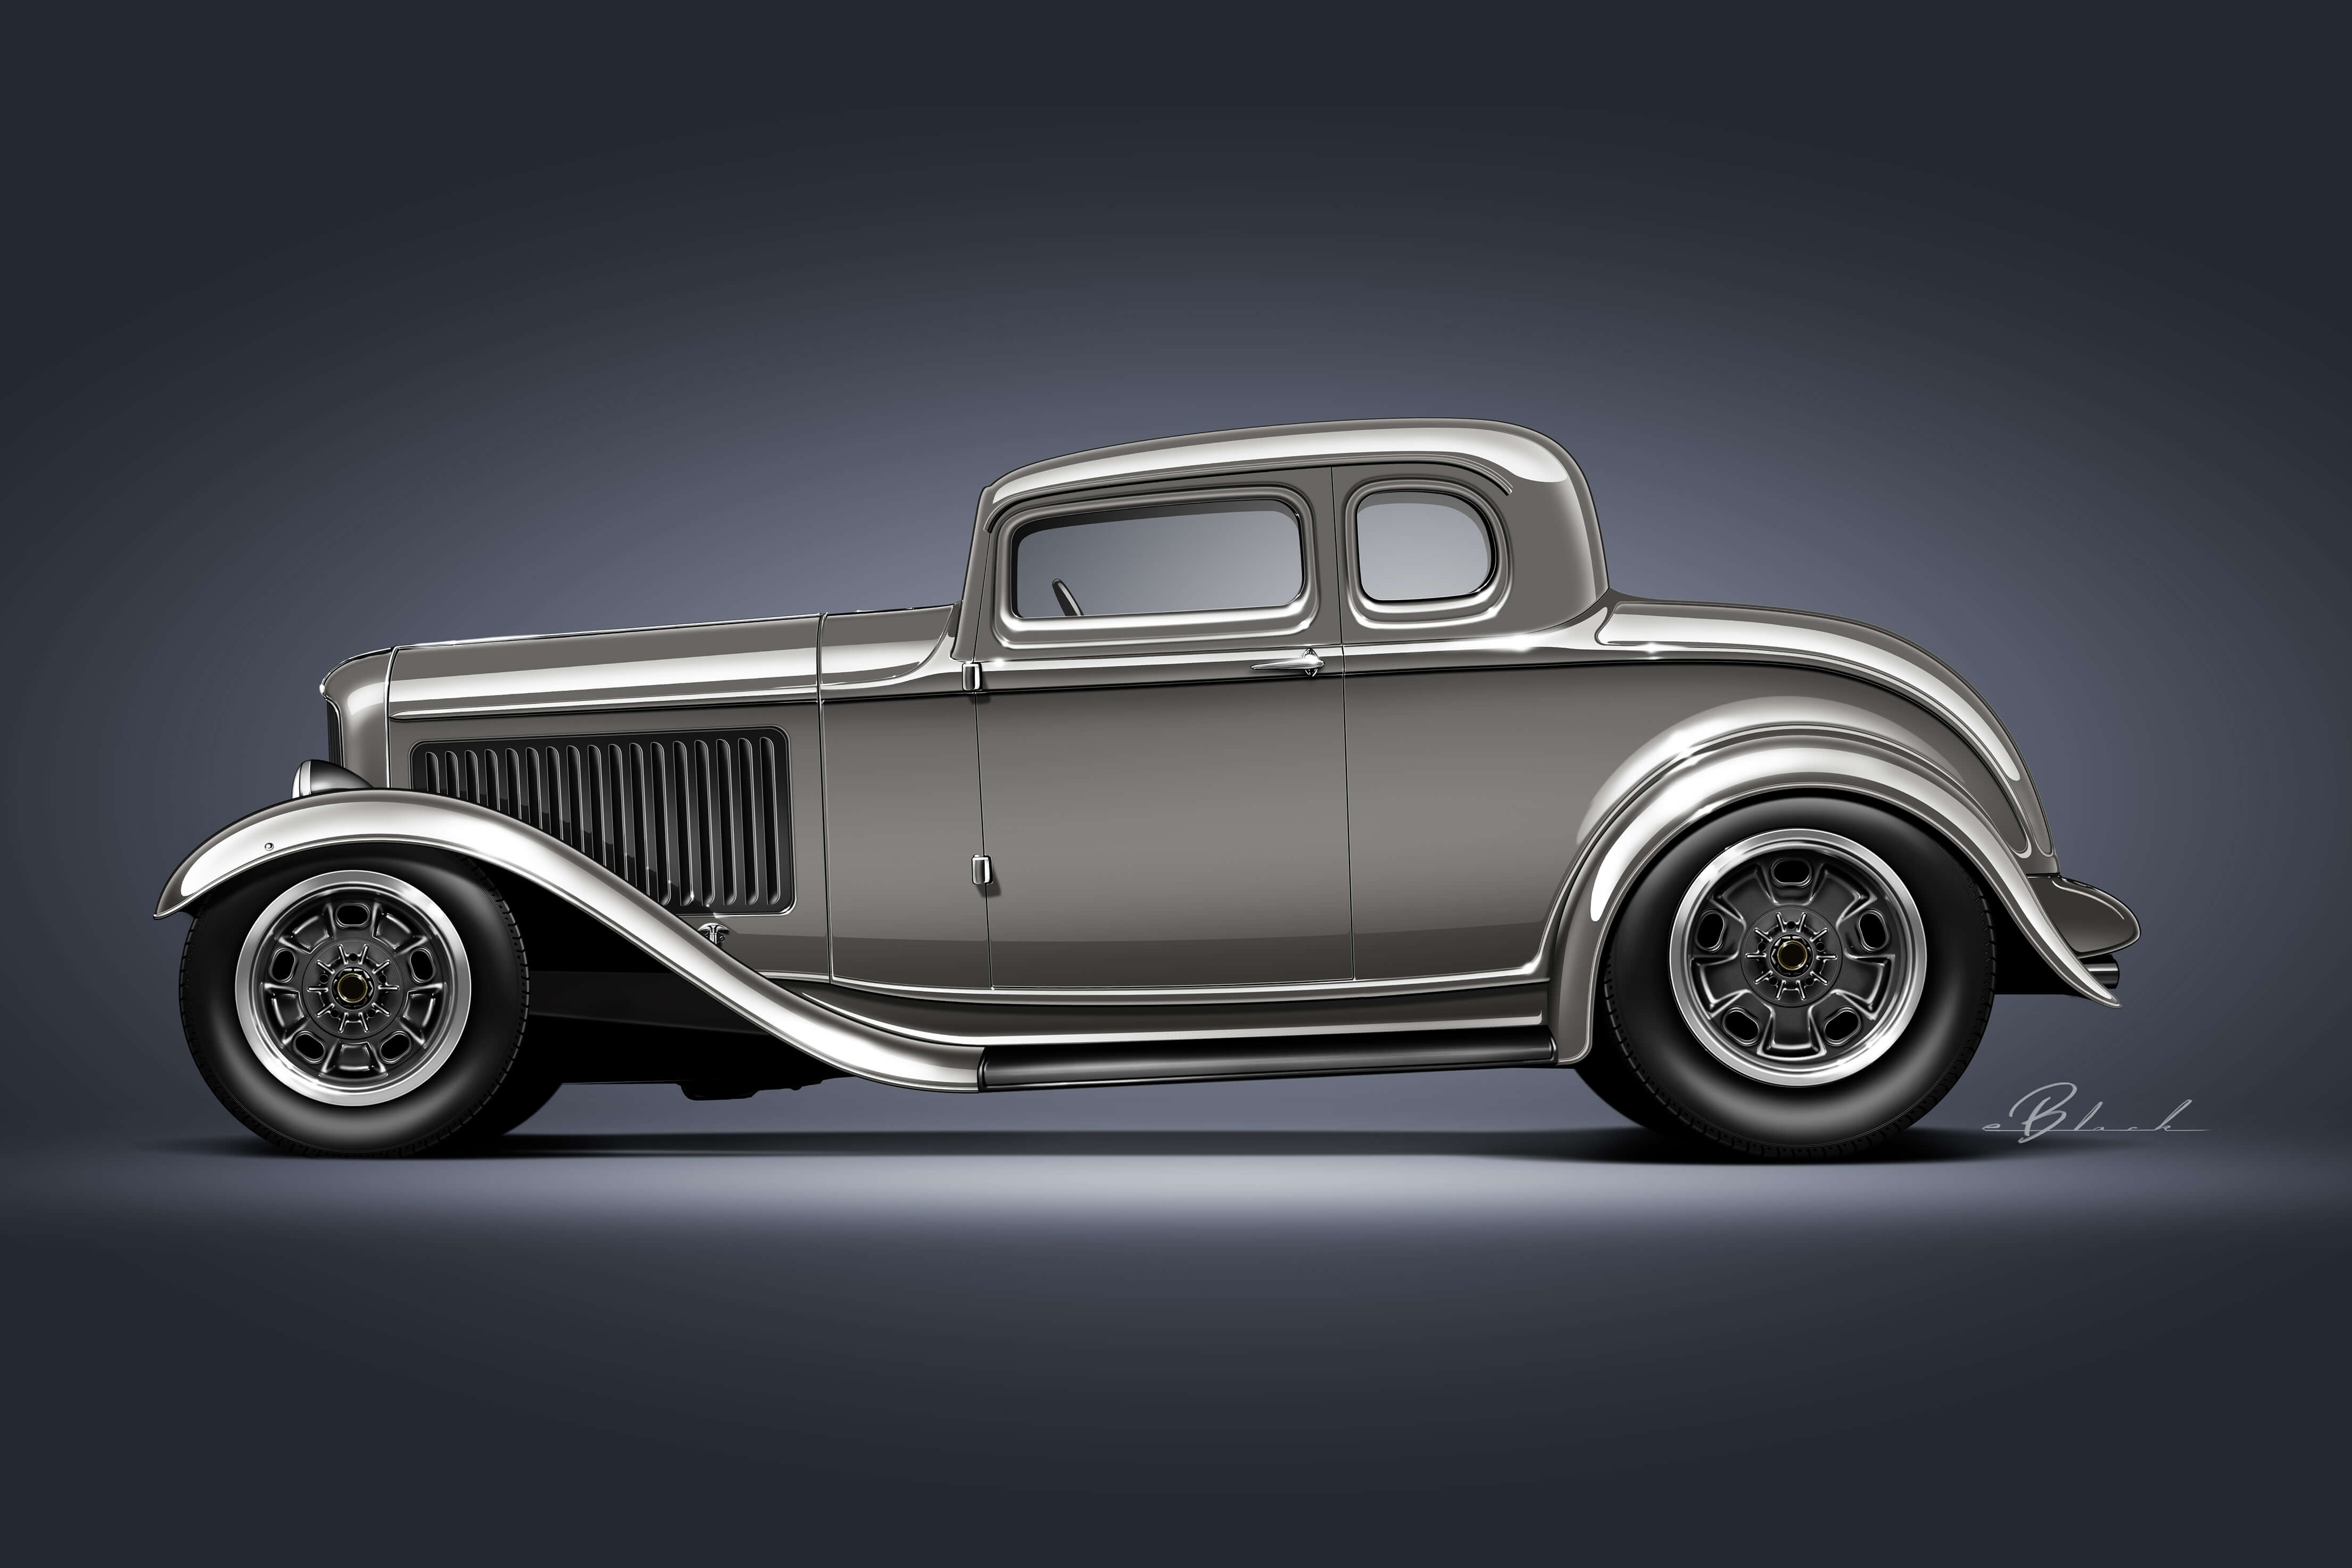 1932 Ford 5W Coupe